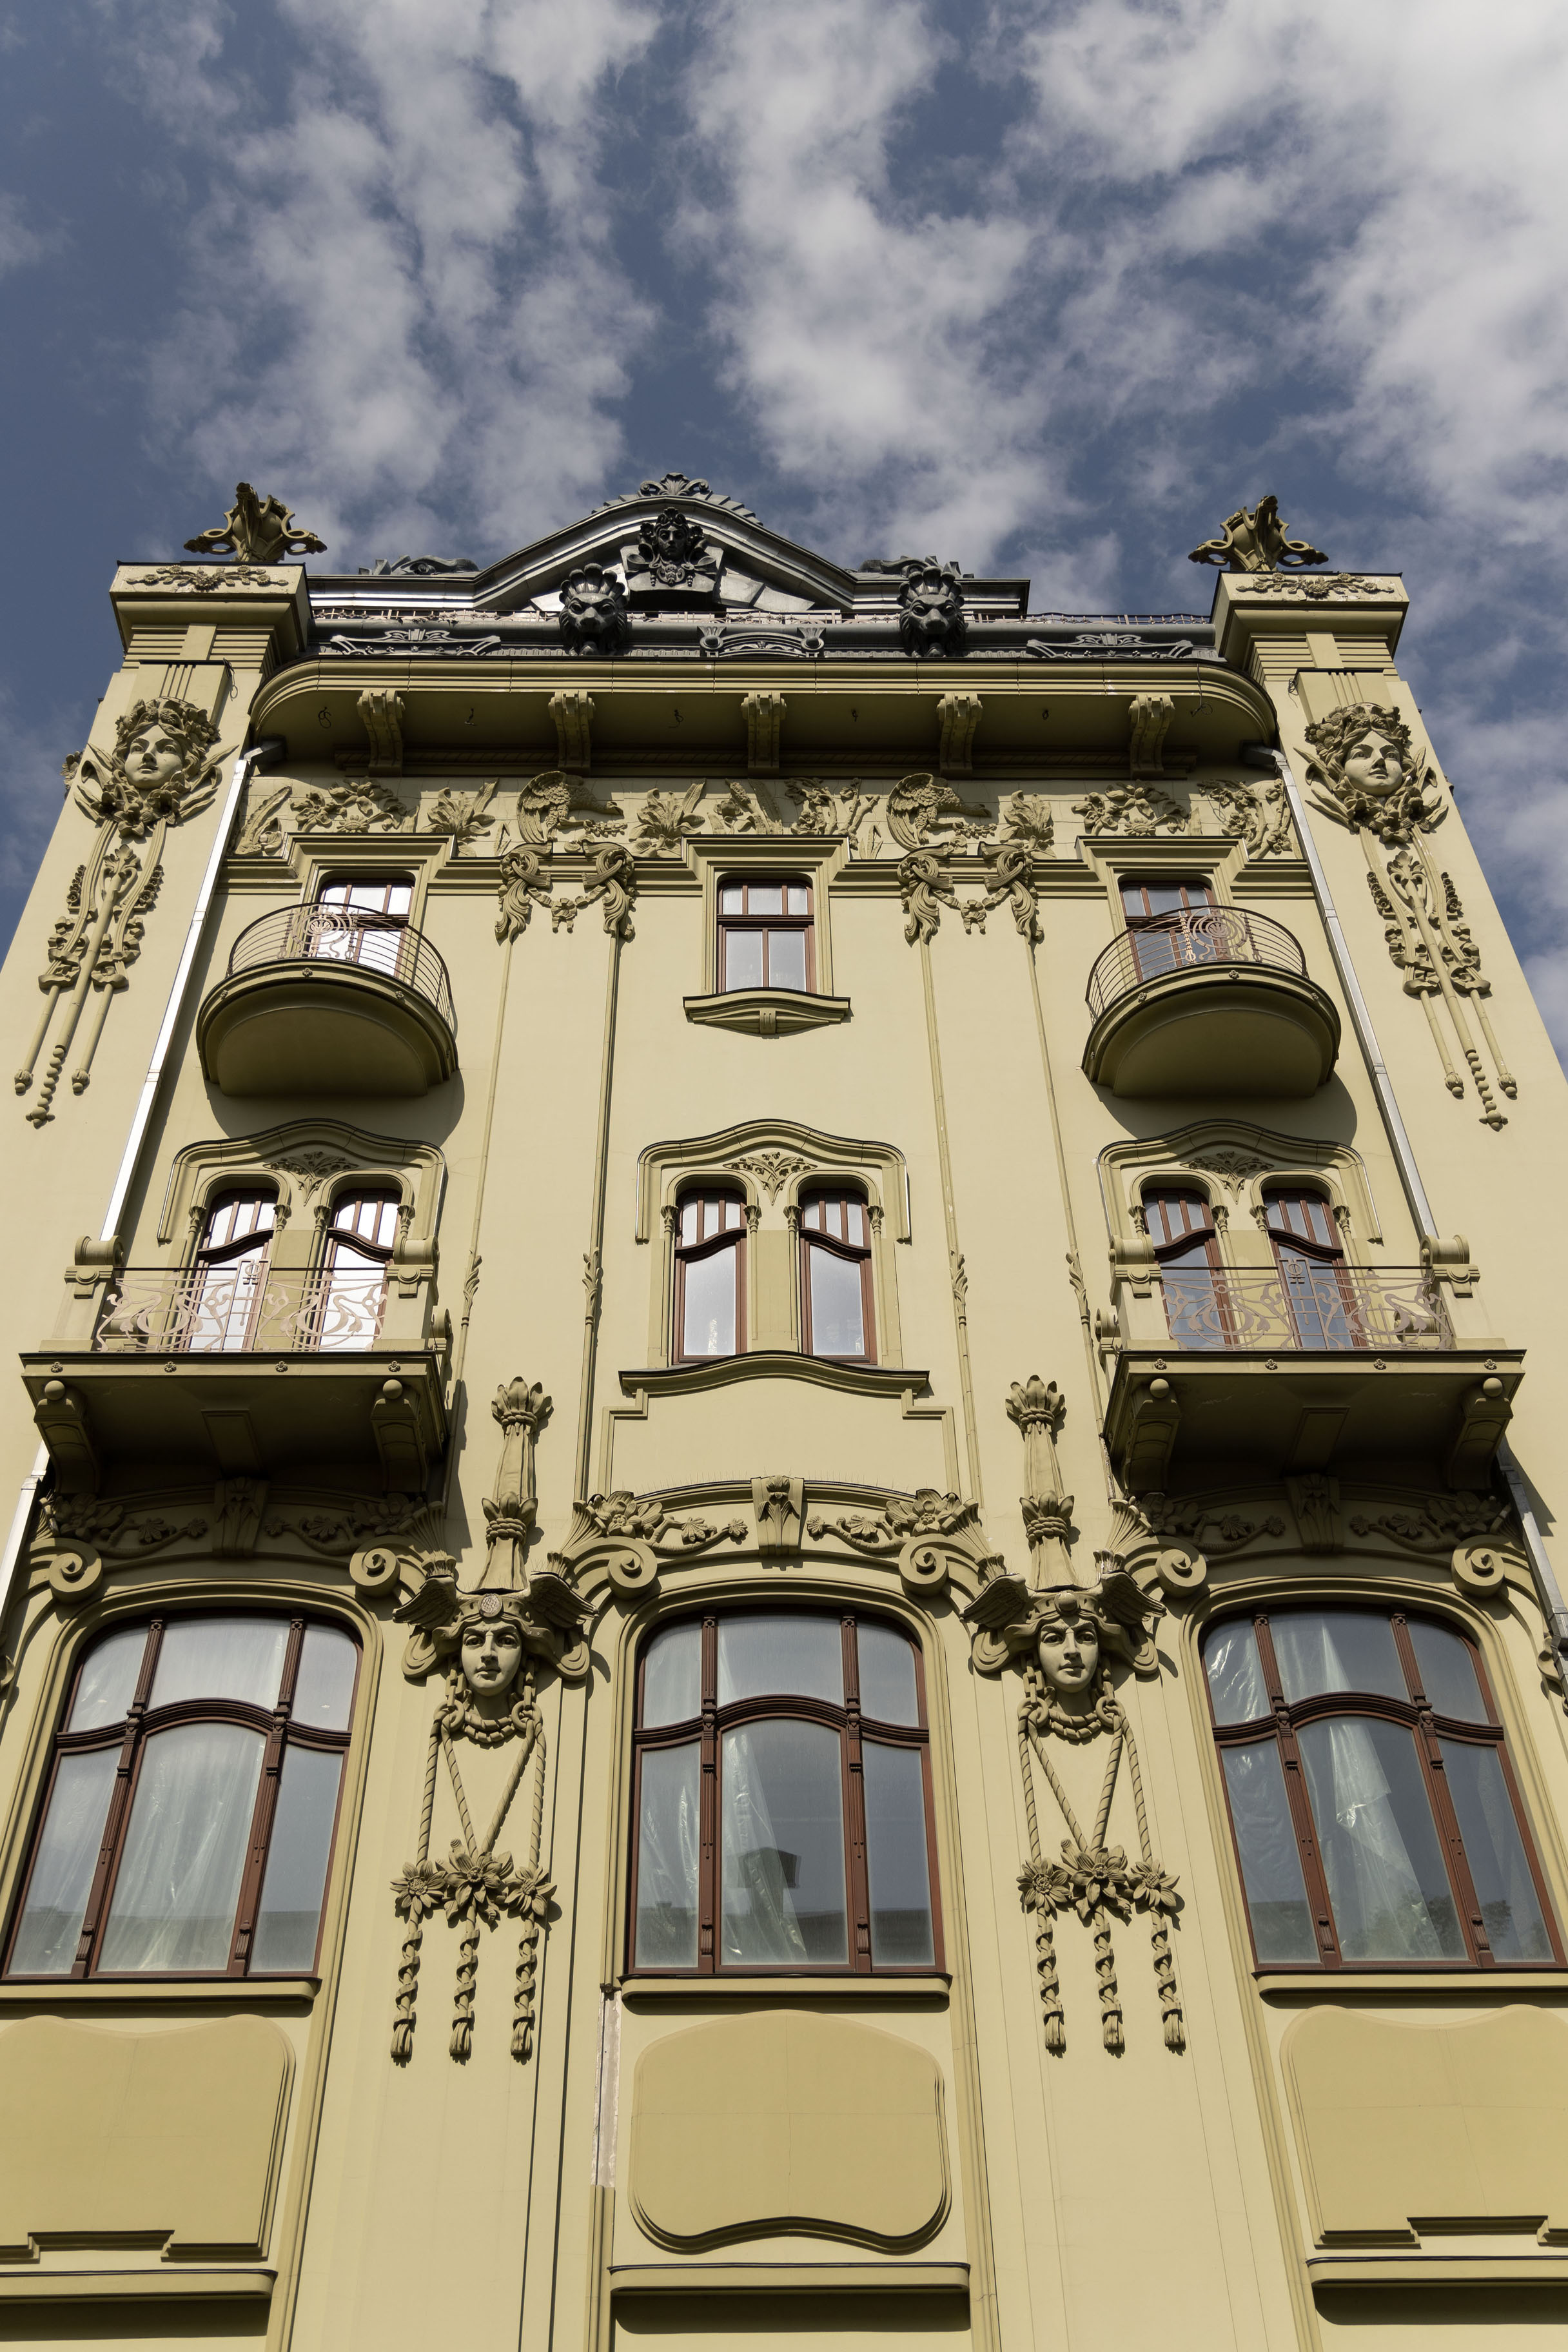 Looking up one of the many elegant buildings in Odesa | Impressions de Odesa | Ukraine